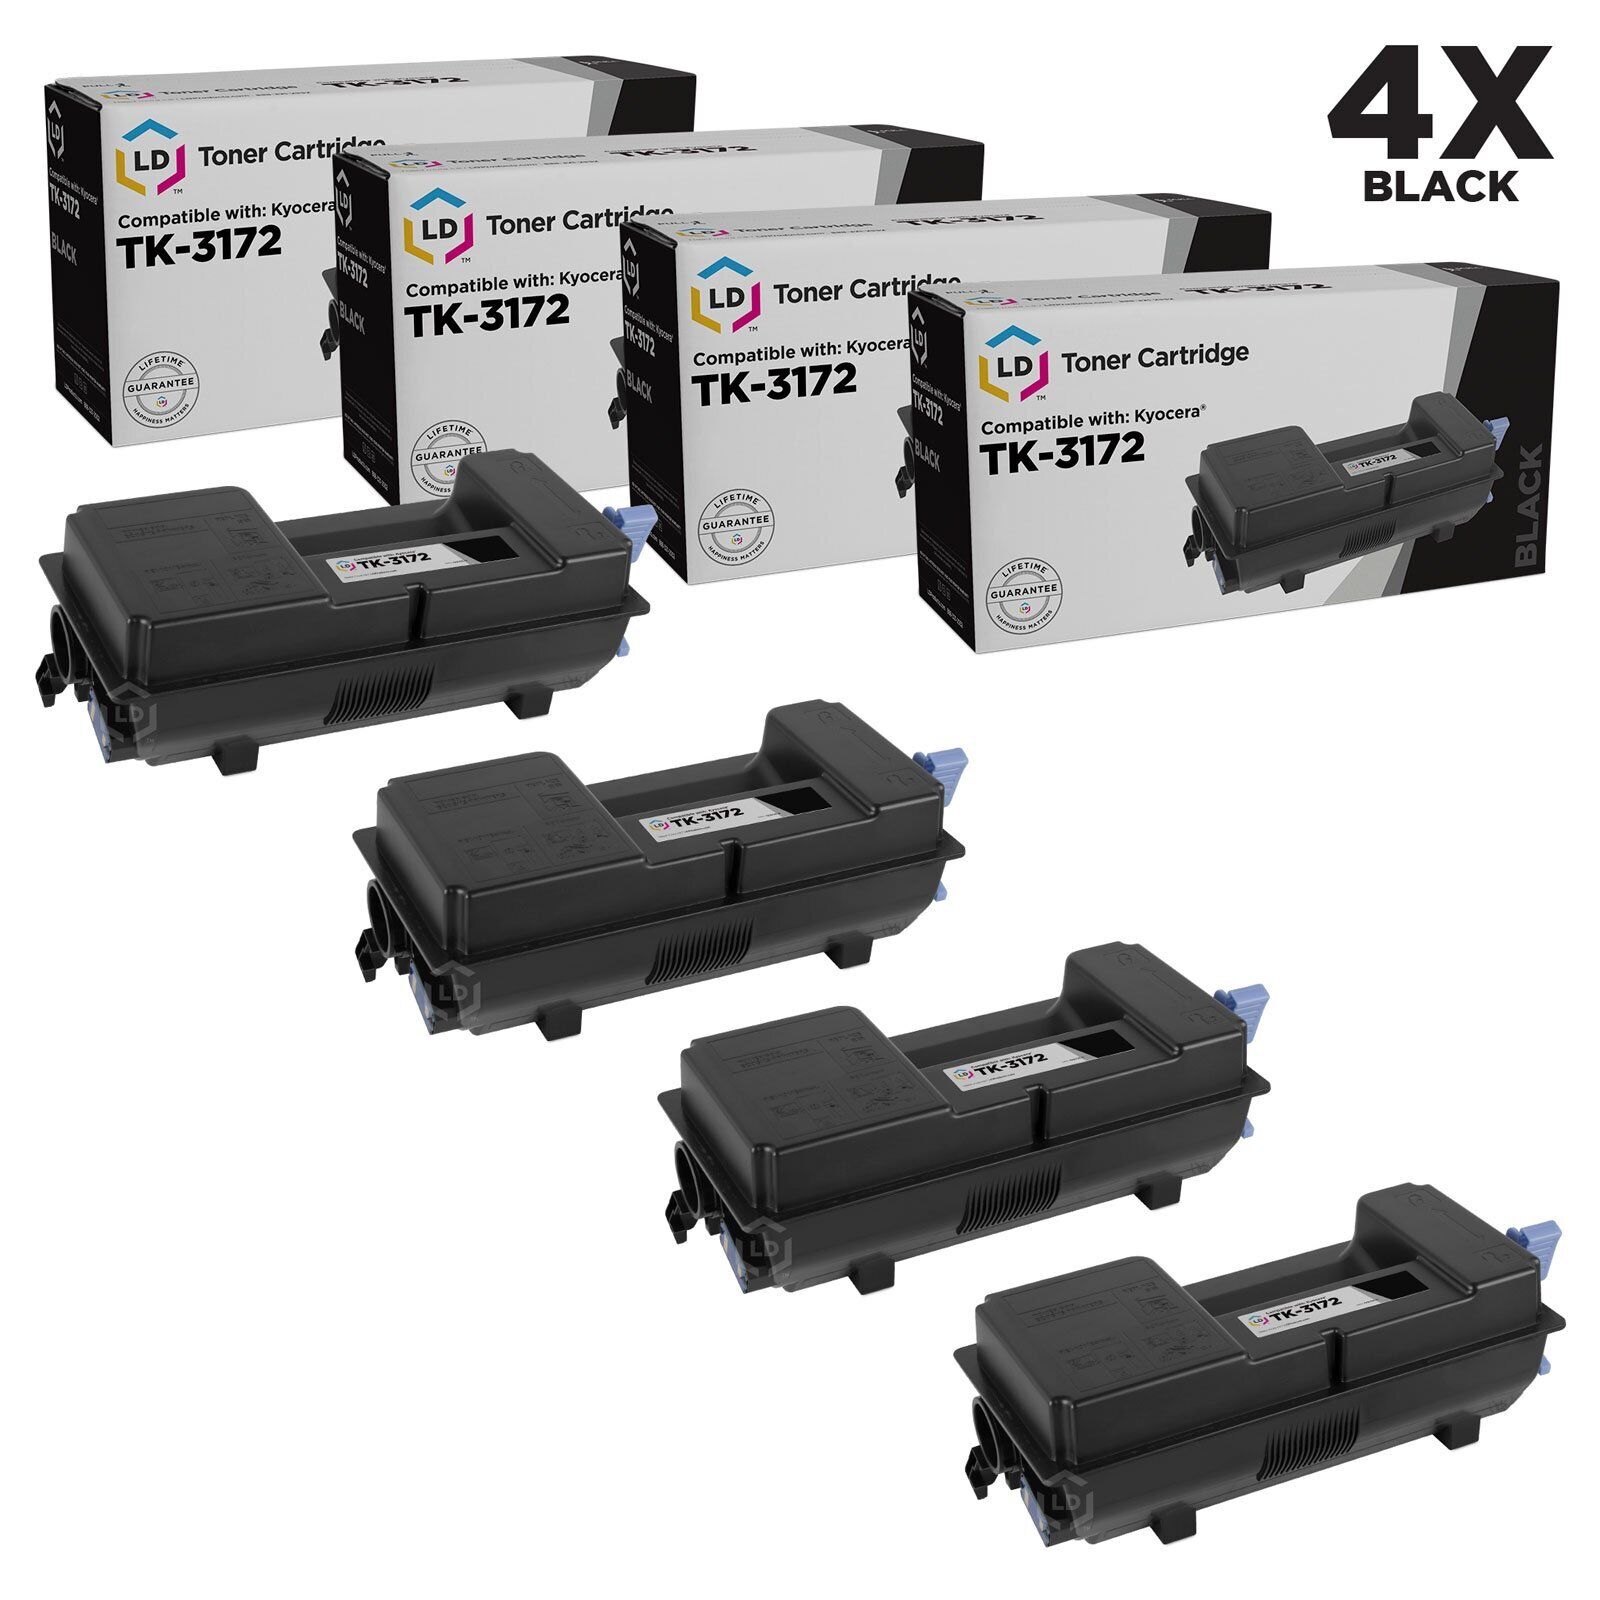 LD Compatible Kyocera TK-3172 (1T02T80US0) Black Toner 4-Pack for ECOSYS P3050dn